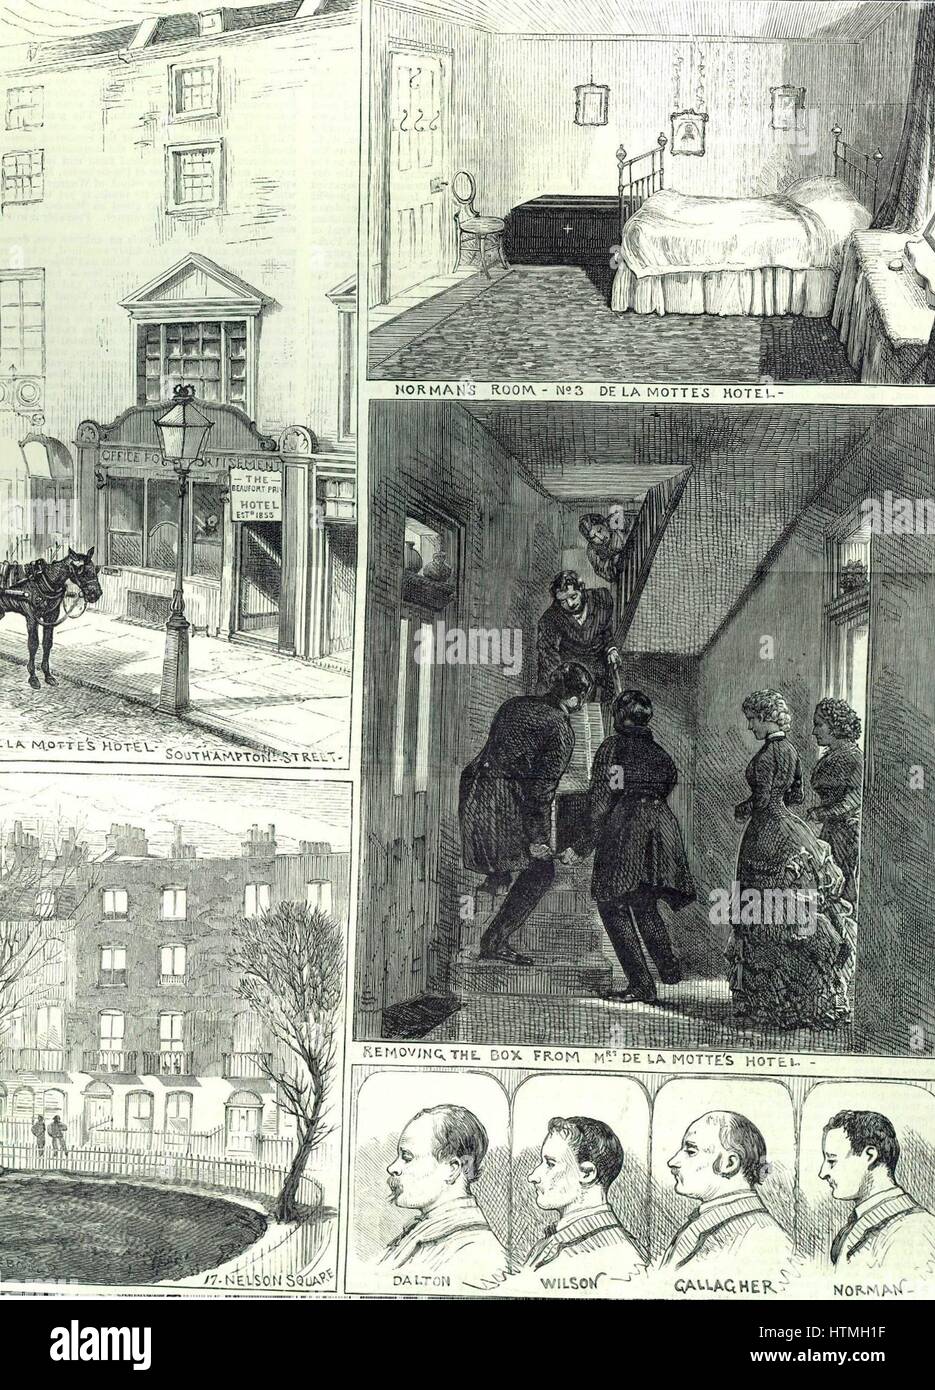 Fenian explosives conspiracy, April 1883. Police removing from Mrs De la Motte's hotel, near The Strand, London, the box of nitro-glycerine brought by Norman from Birmingham. Below: Conspirators Dalton, Wilson, Gallagher, and Norman. From 'The Illustrated London News', 14 April 1883. Stock Photo